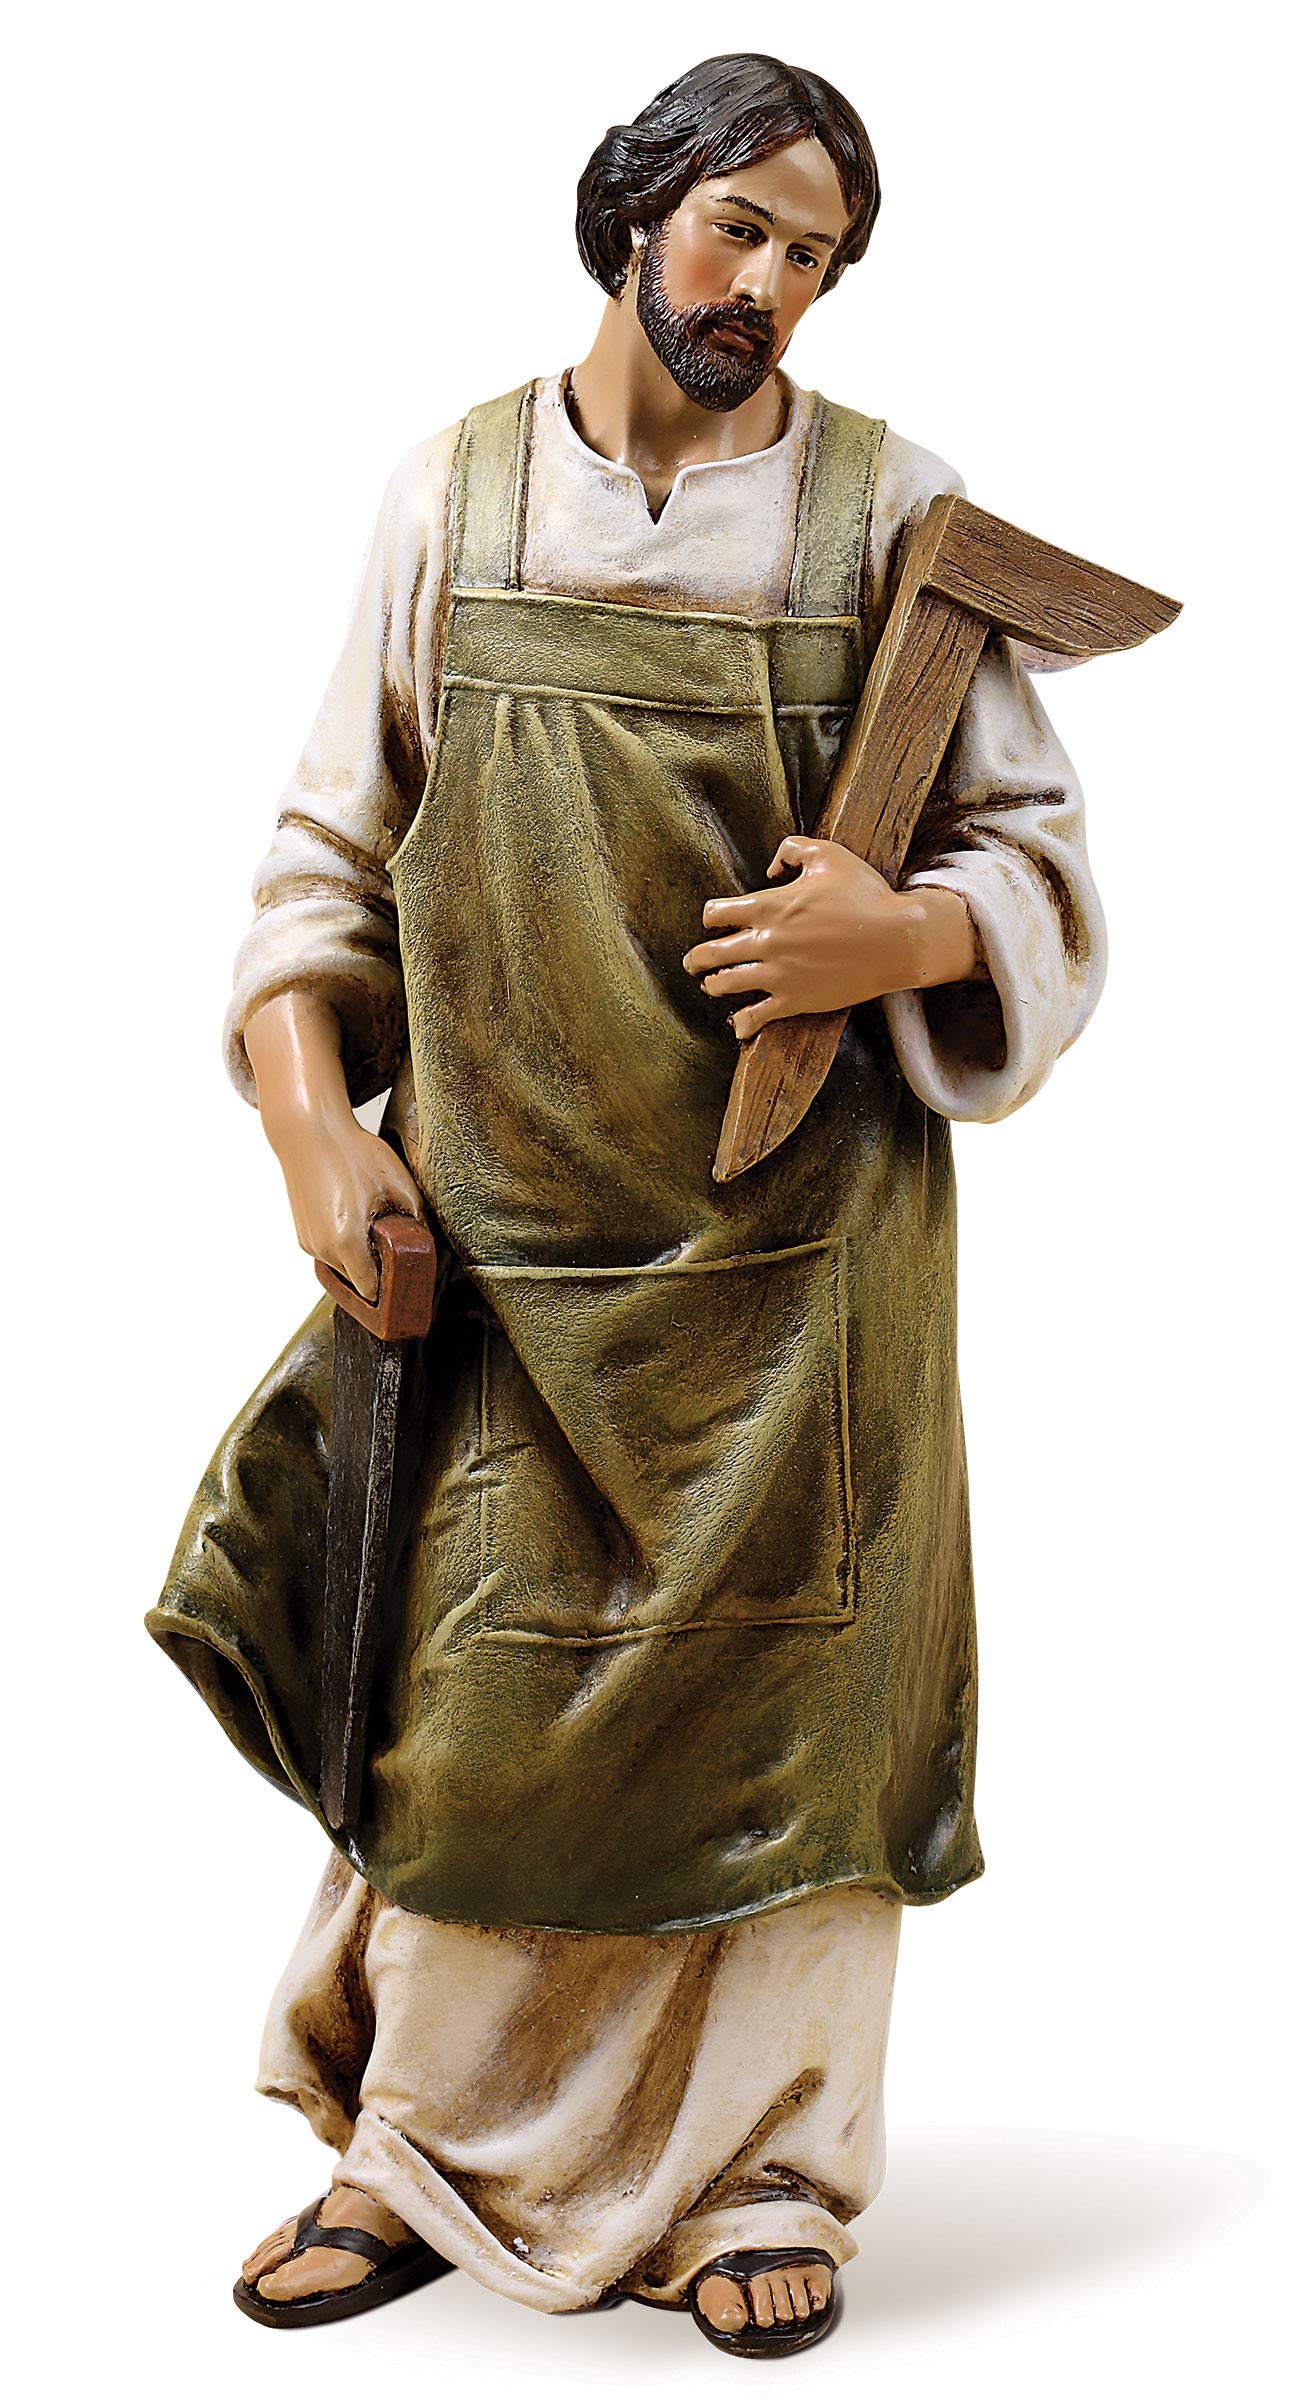 Joseph's Studio by Roman - St. Joseph The Worker Figure, Life of Christ, Renaissance Collection, 10.25" H, Resin and Stone, Religious Gift,...